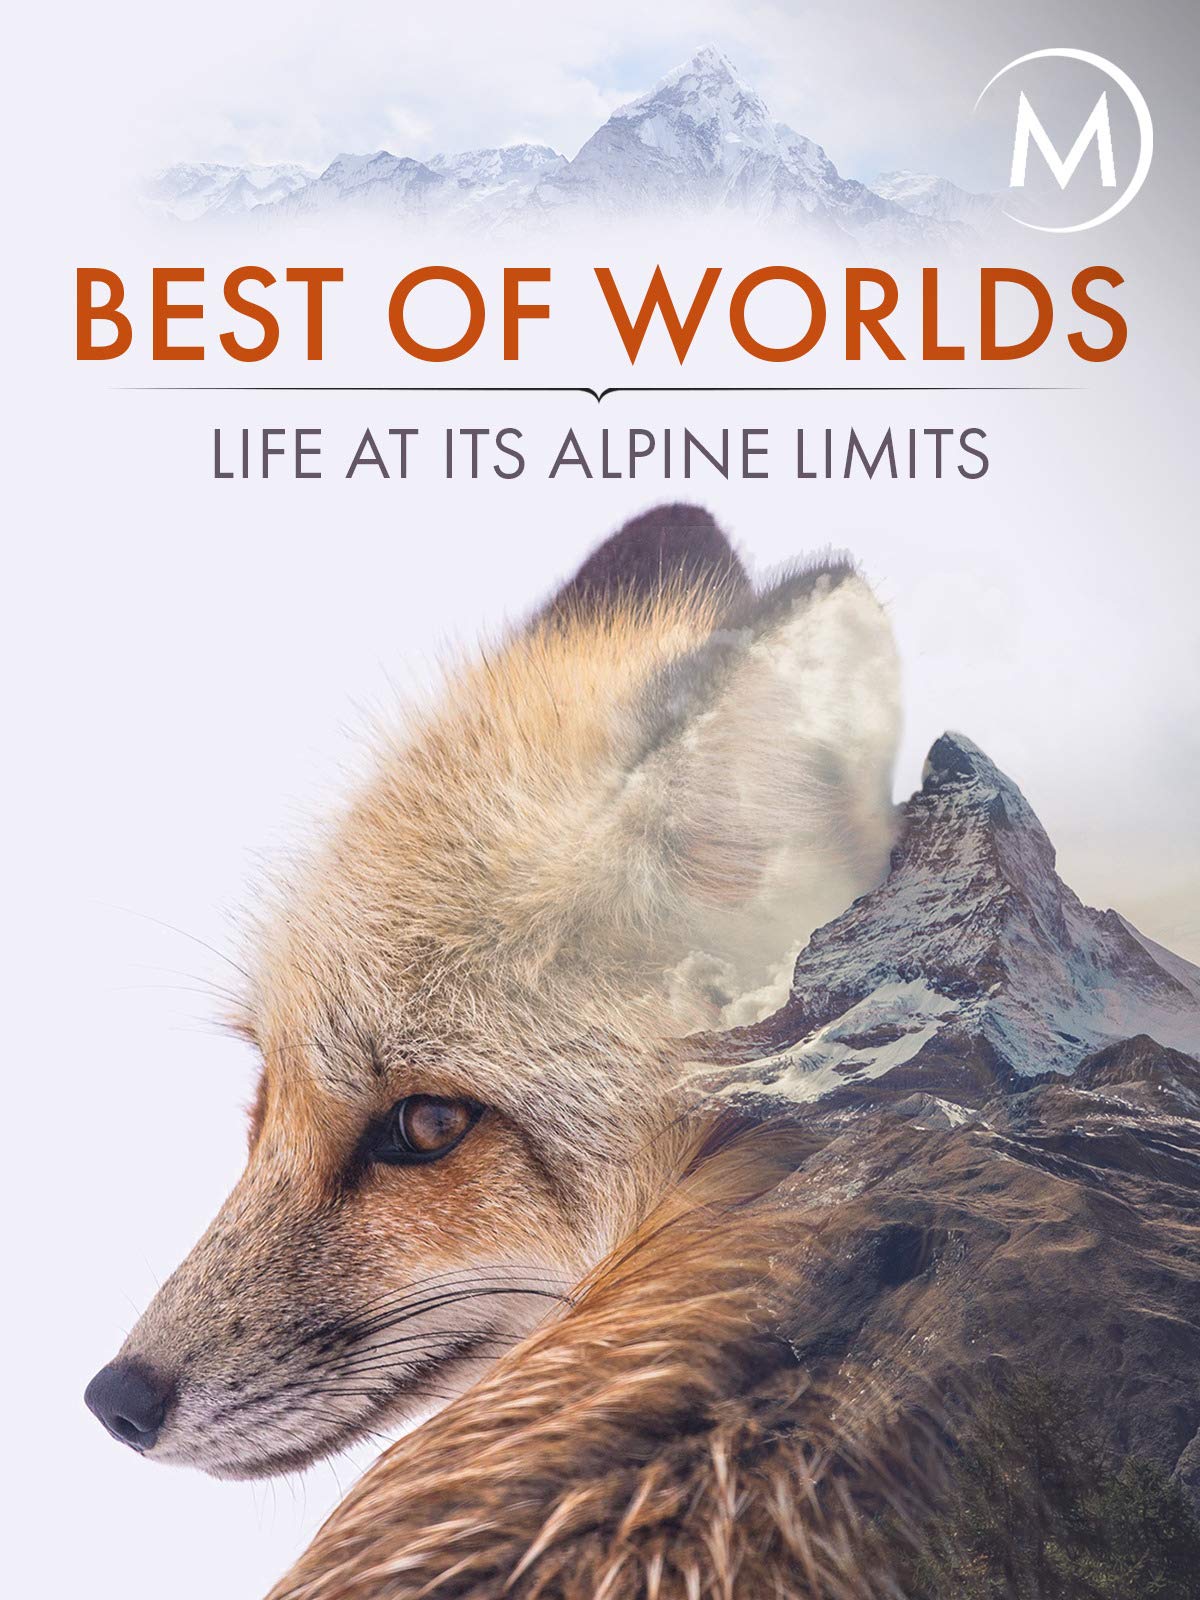 Best of Worlds: Life at its Alpine Limits